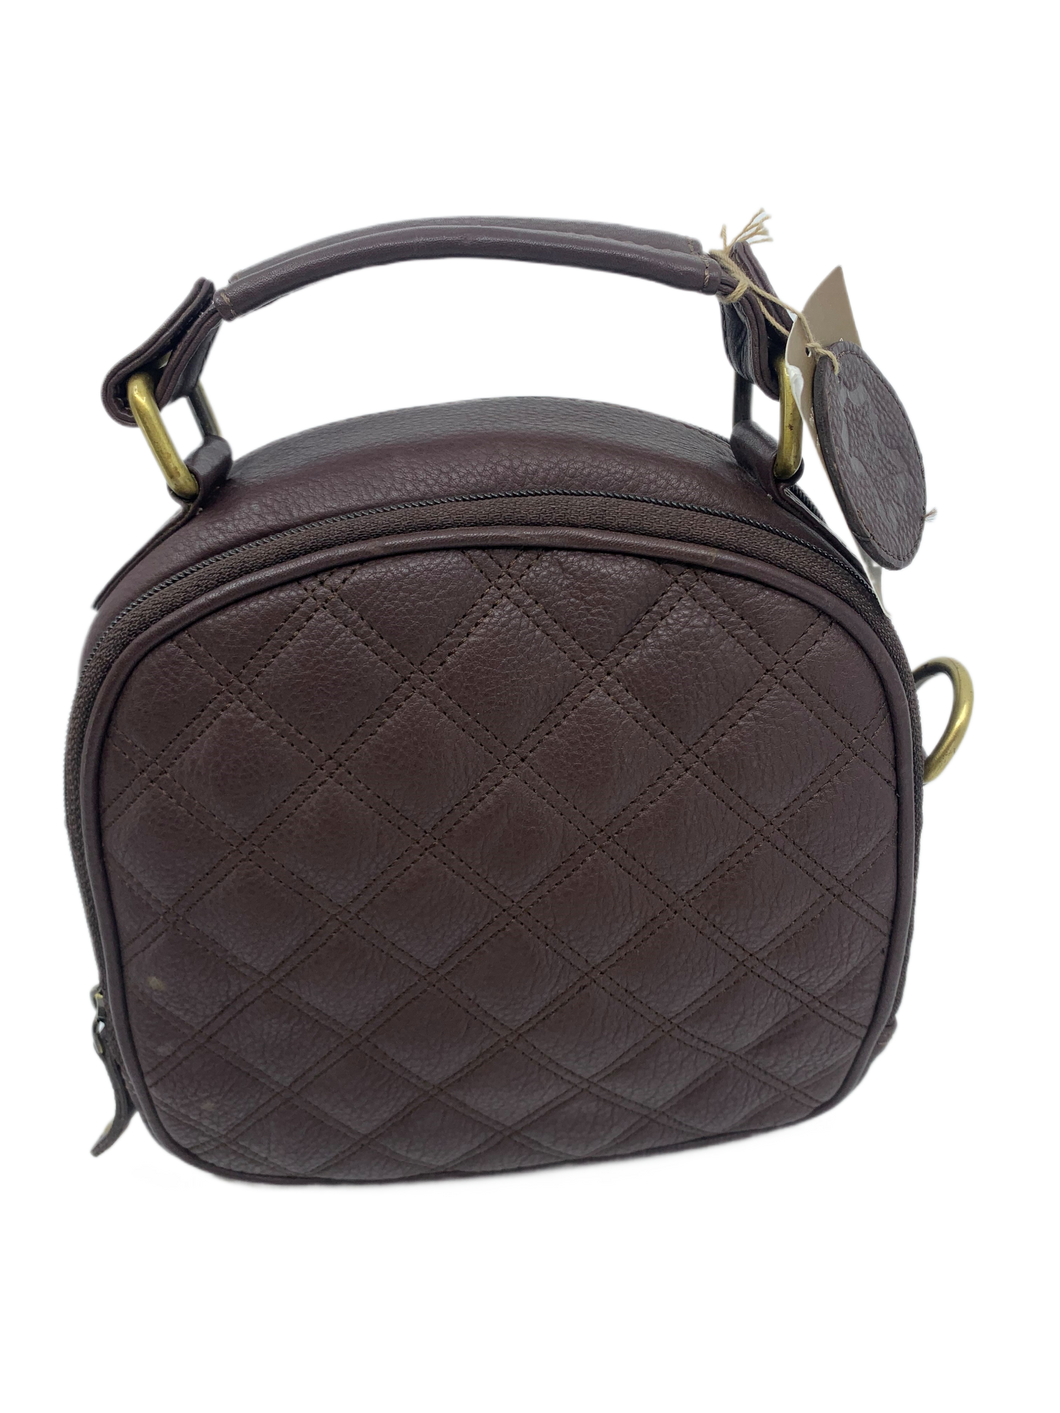 leather quilted mini bowling bag brown - seconds